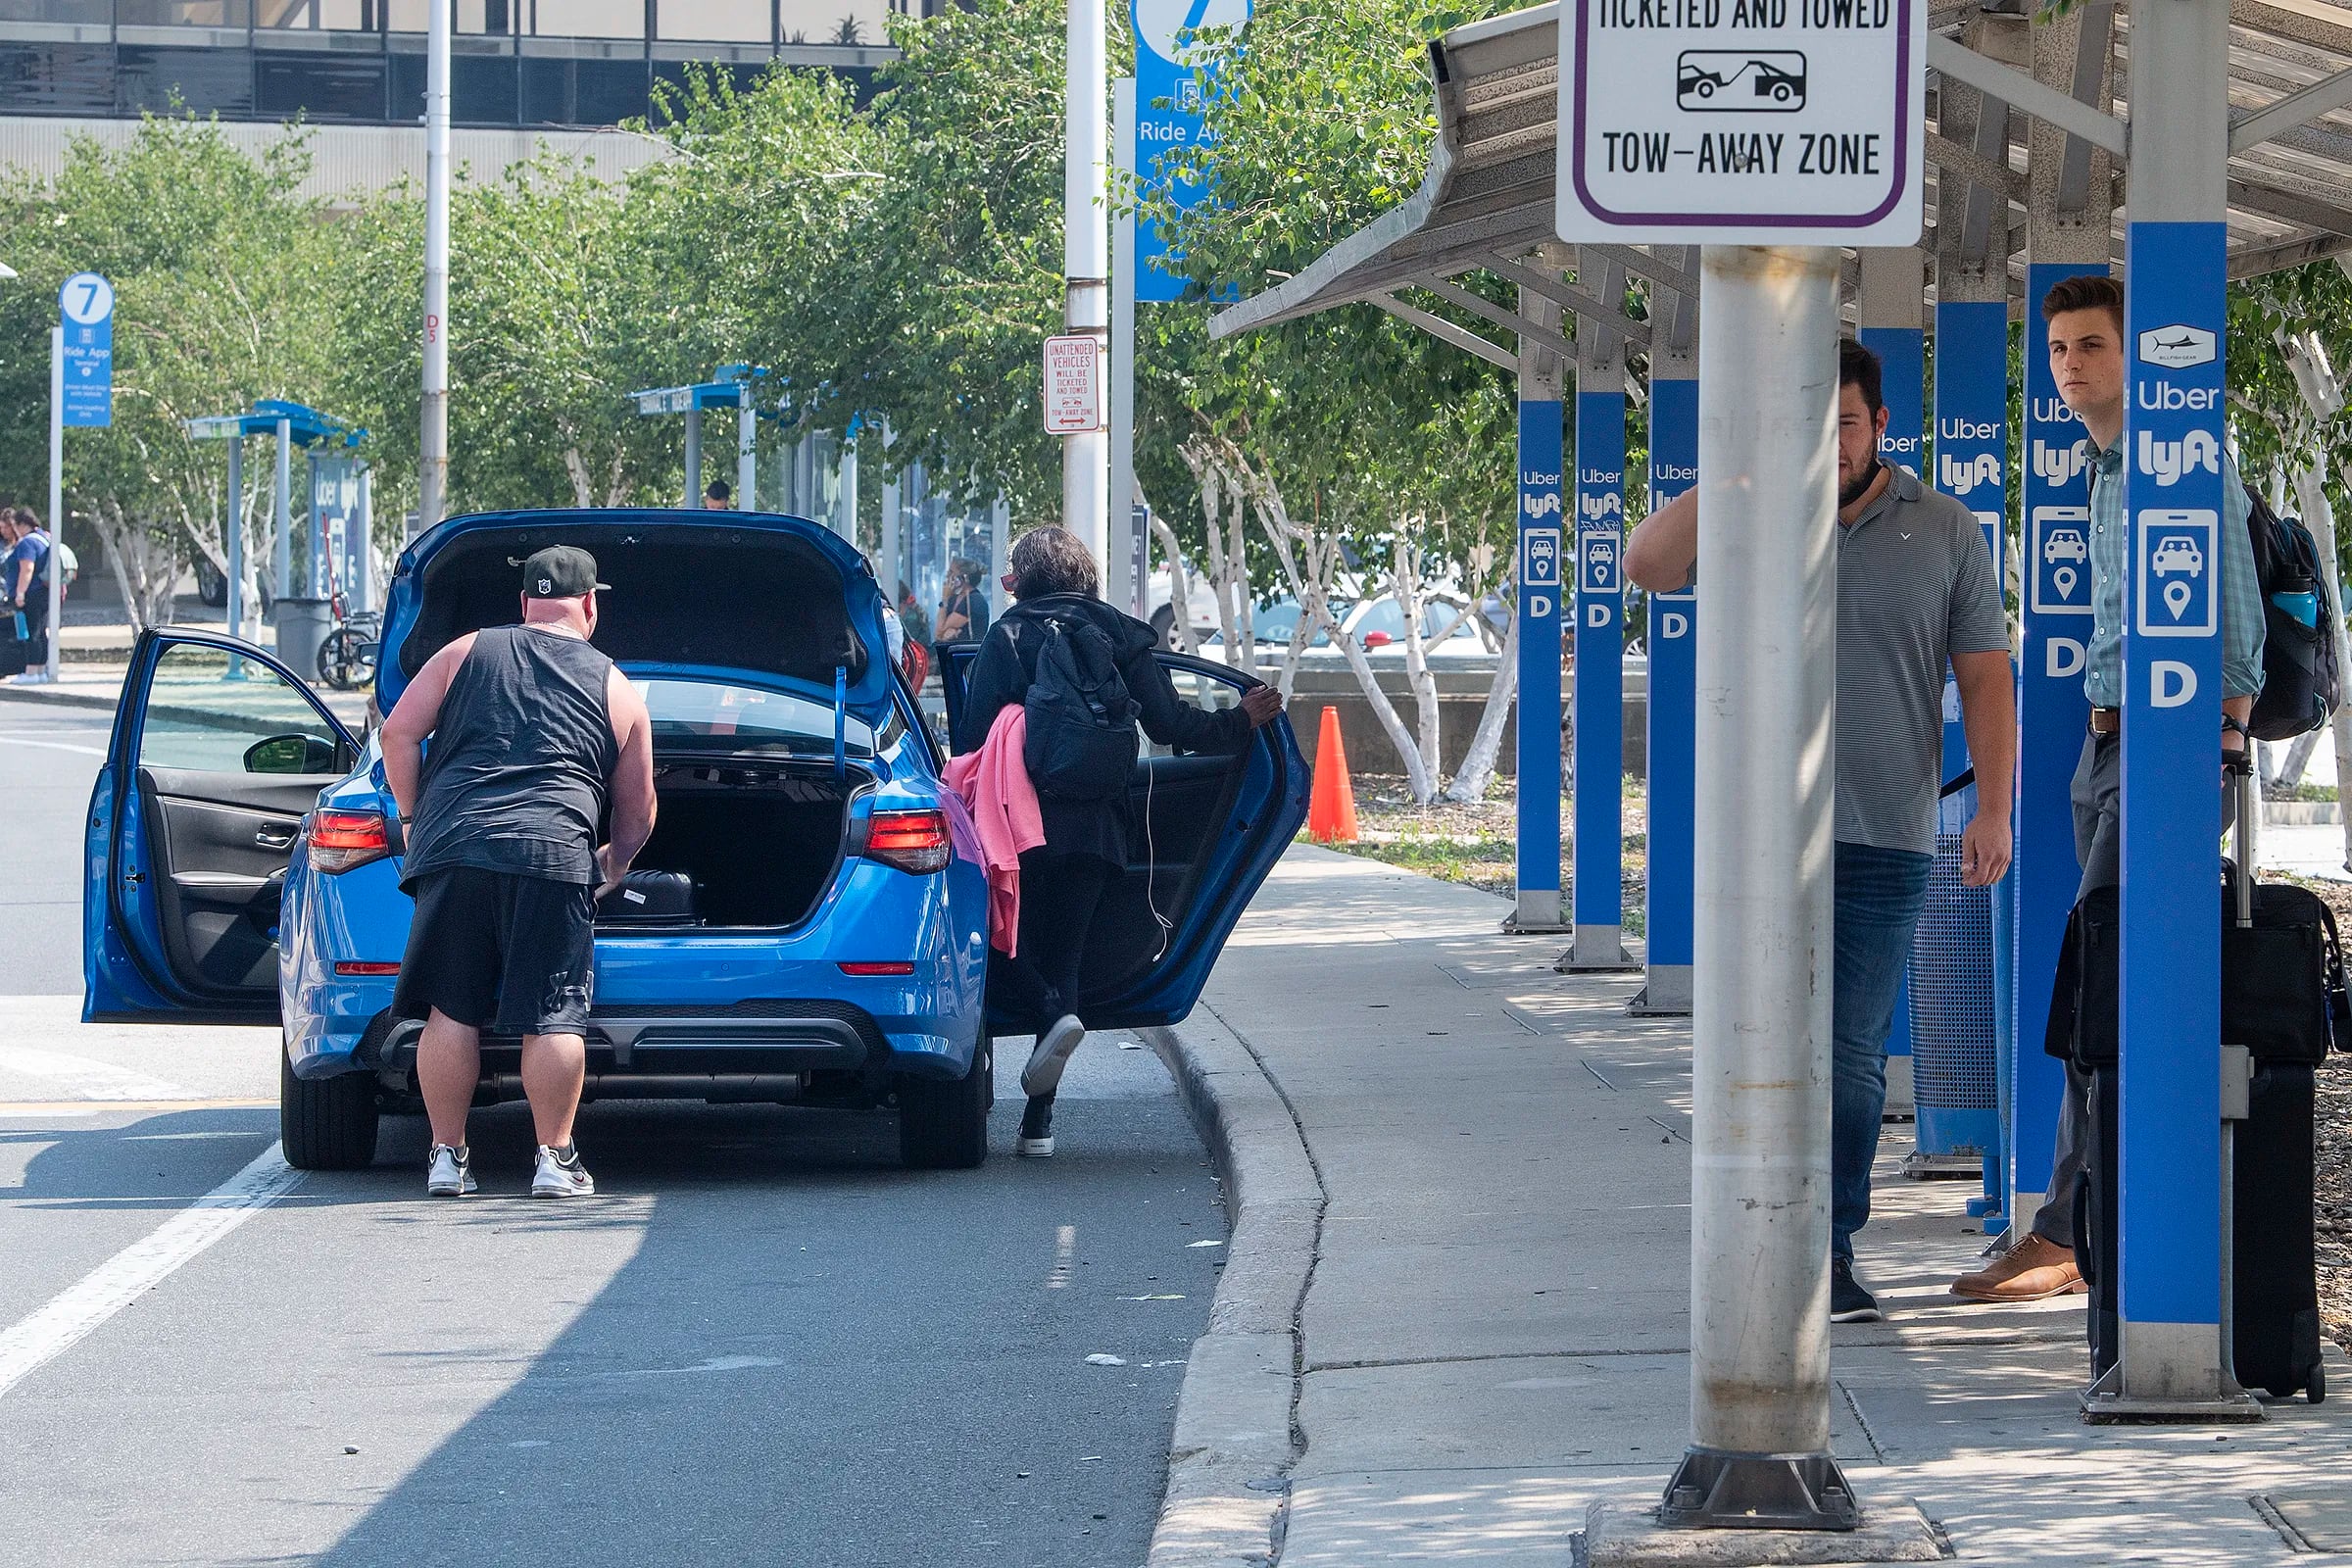 Uber and Lyft drivers picking up arriving passengers outside the baggage claim in July 2021 at the Philadelphia International Airport.